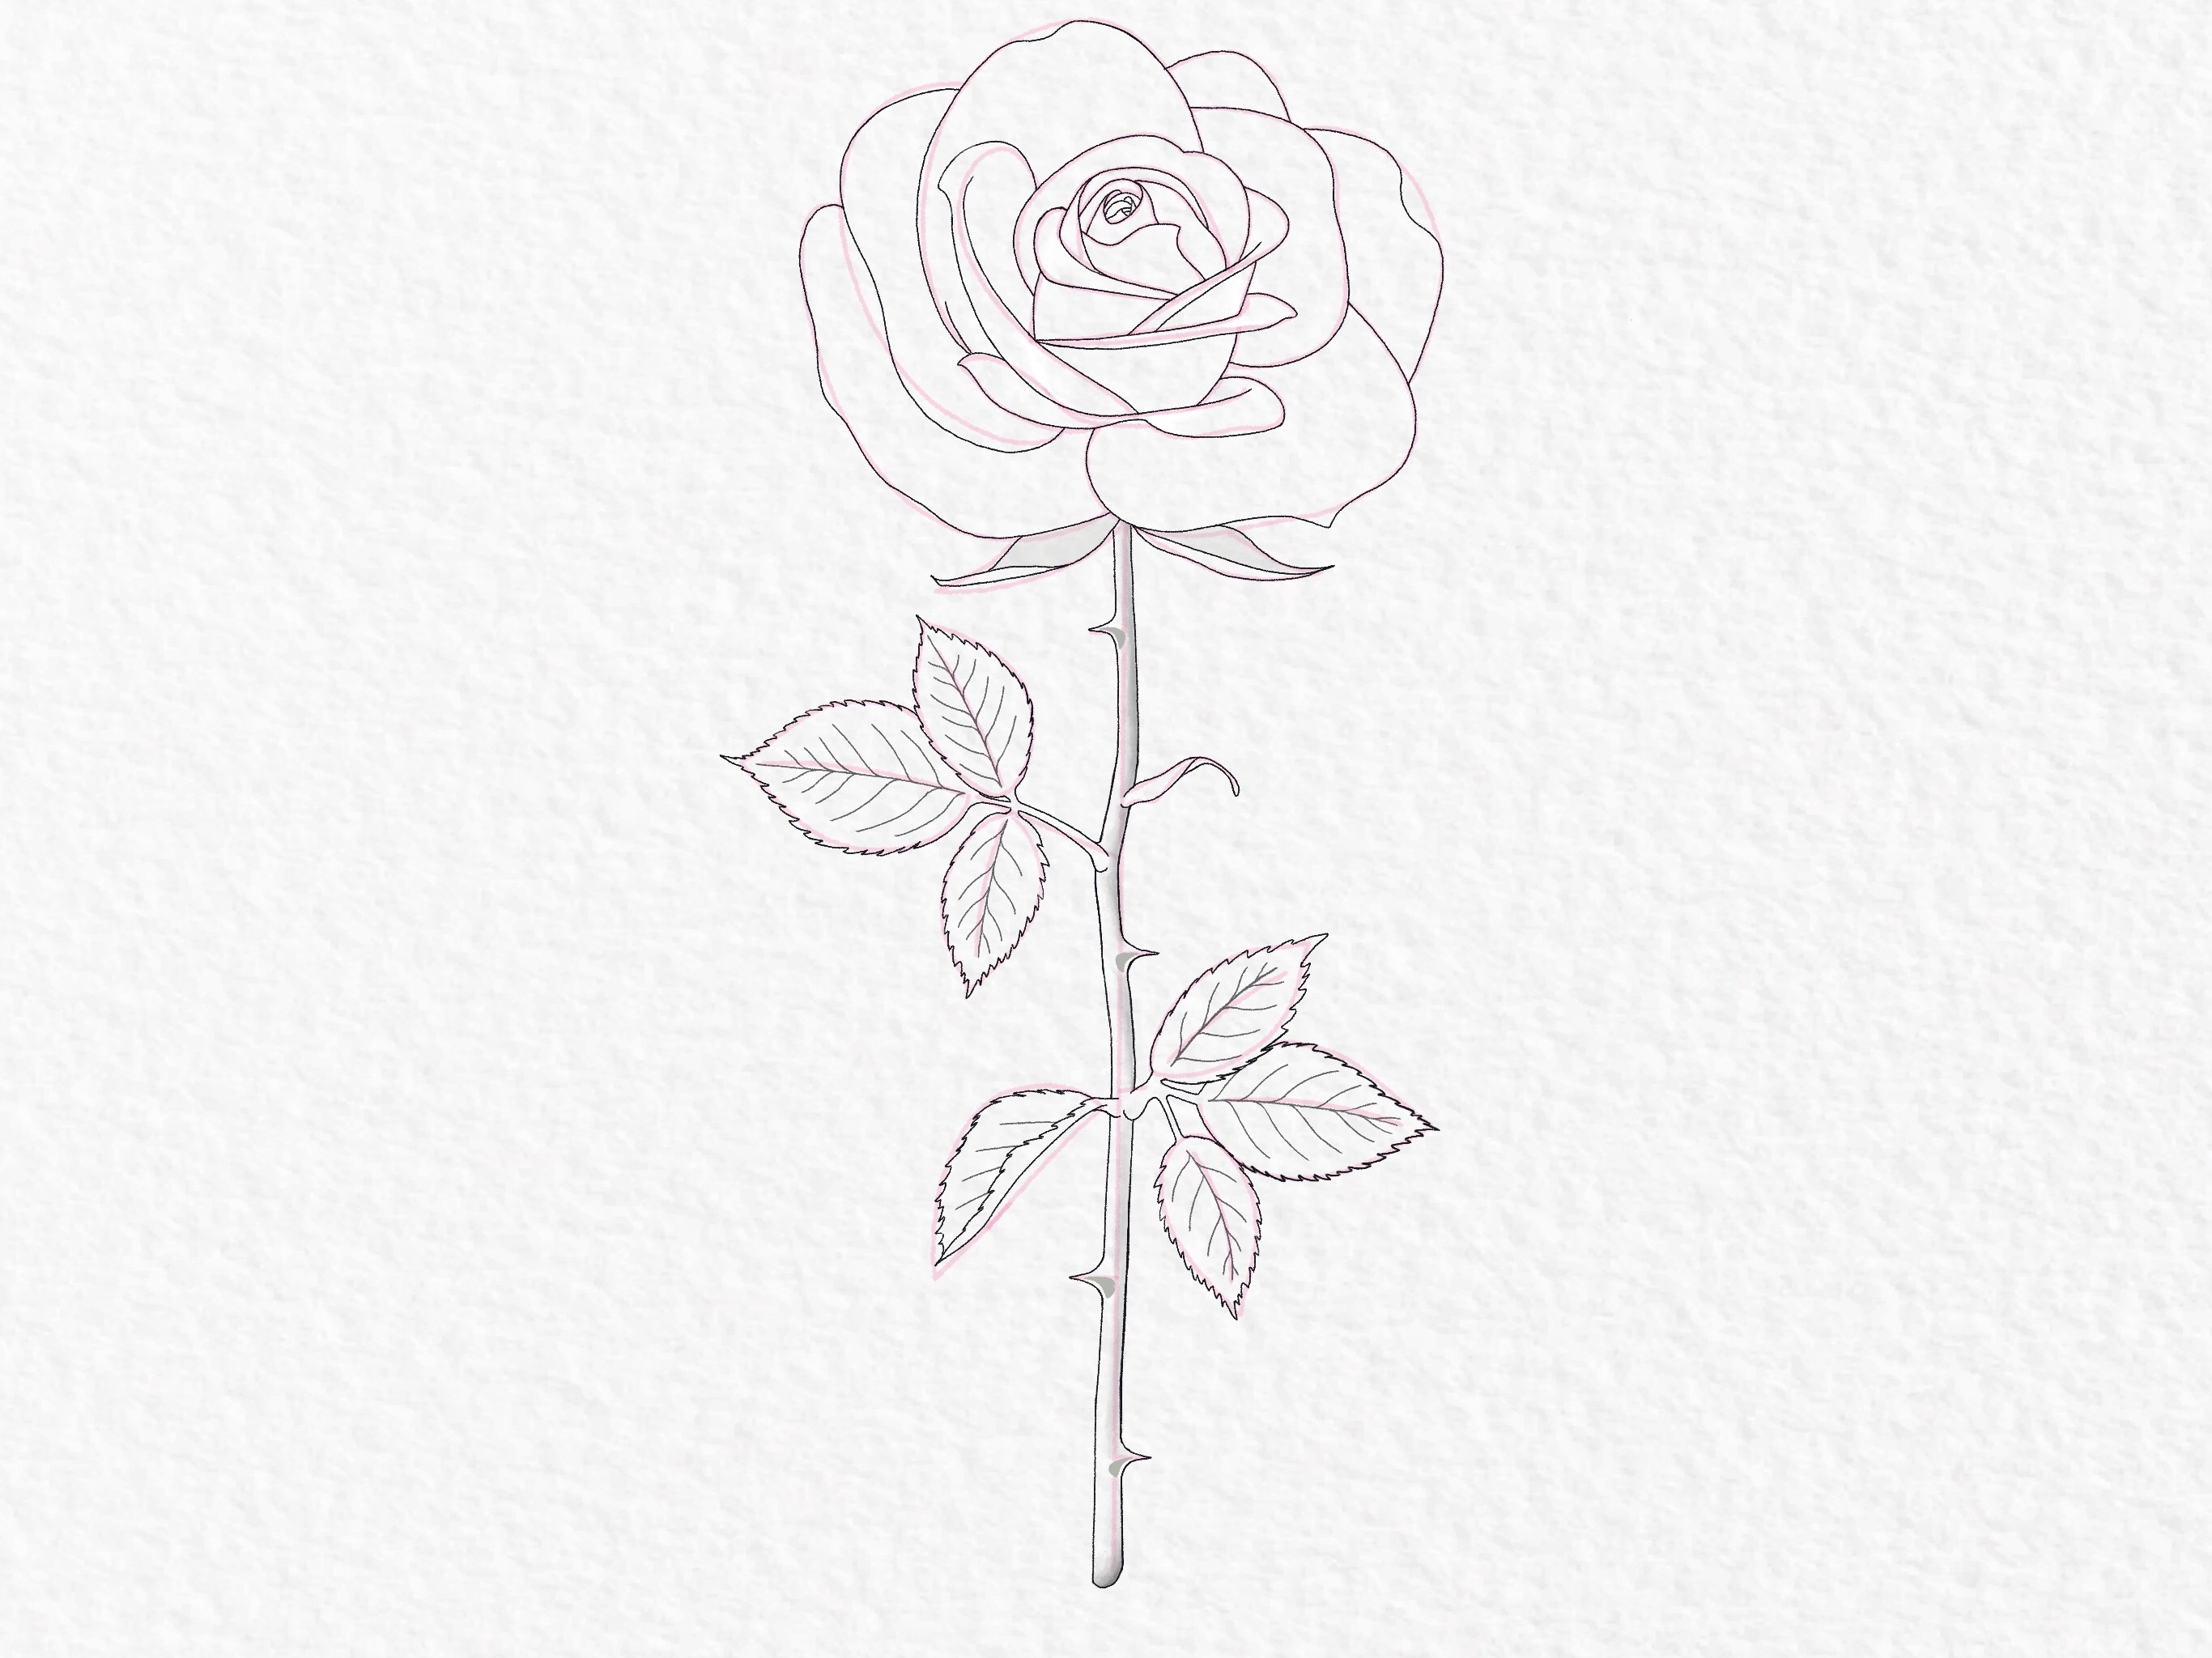 How to draw a rose, step by step drawing tutorial - step 41